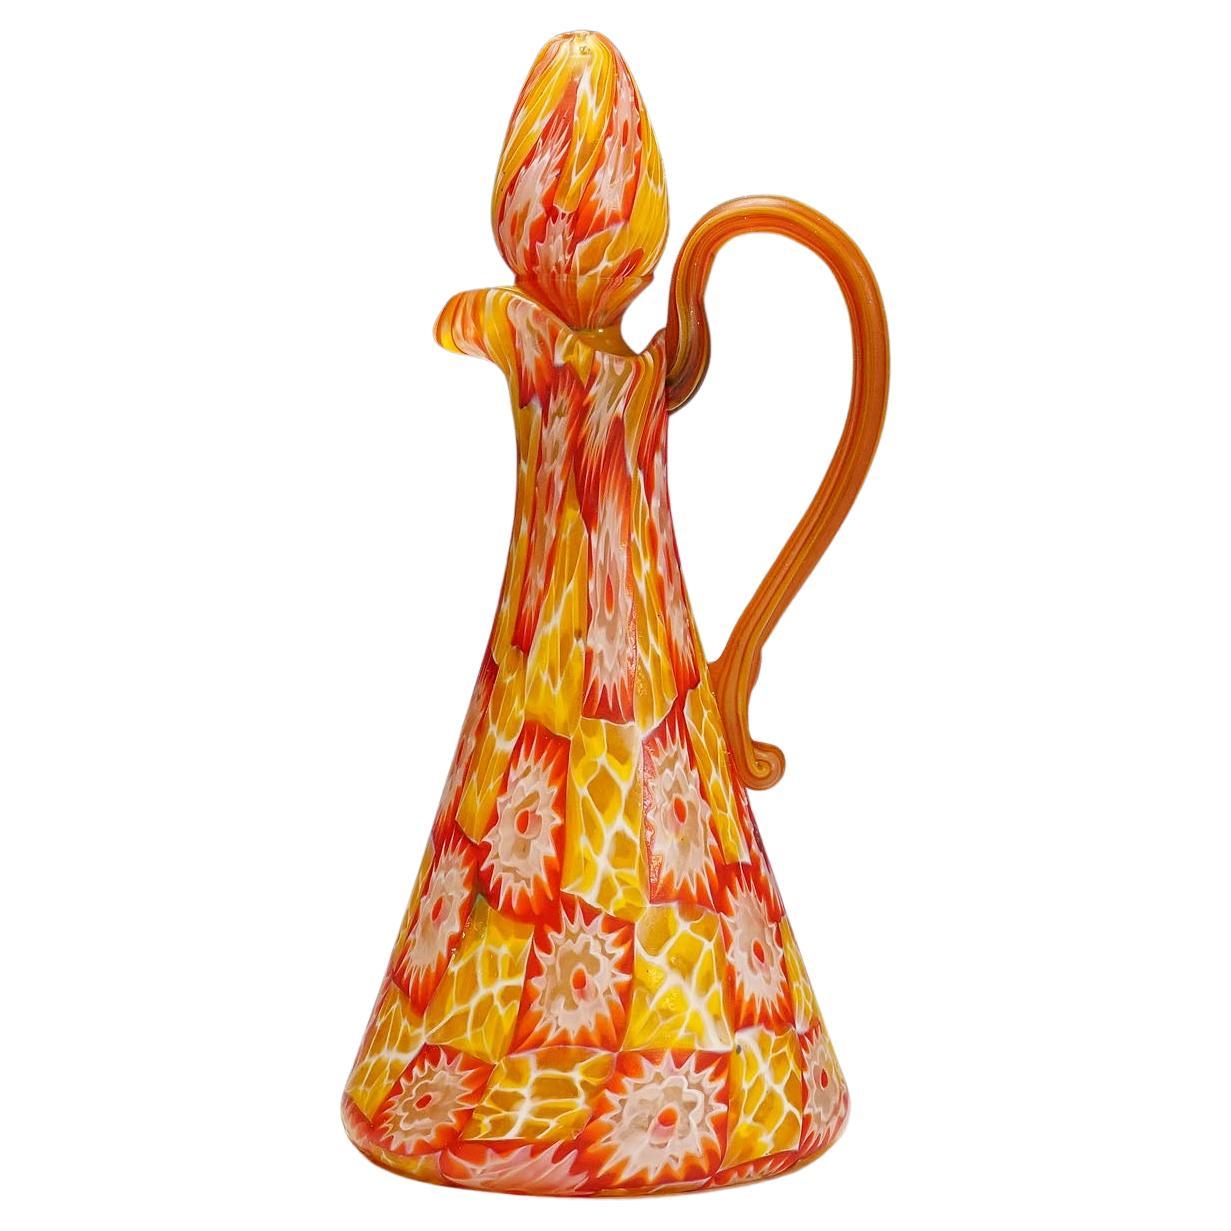 Antique Millefiori Jug with Handles by Fratelli Toso, Murano, circa 1920 For Sale